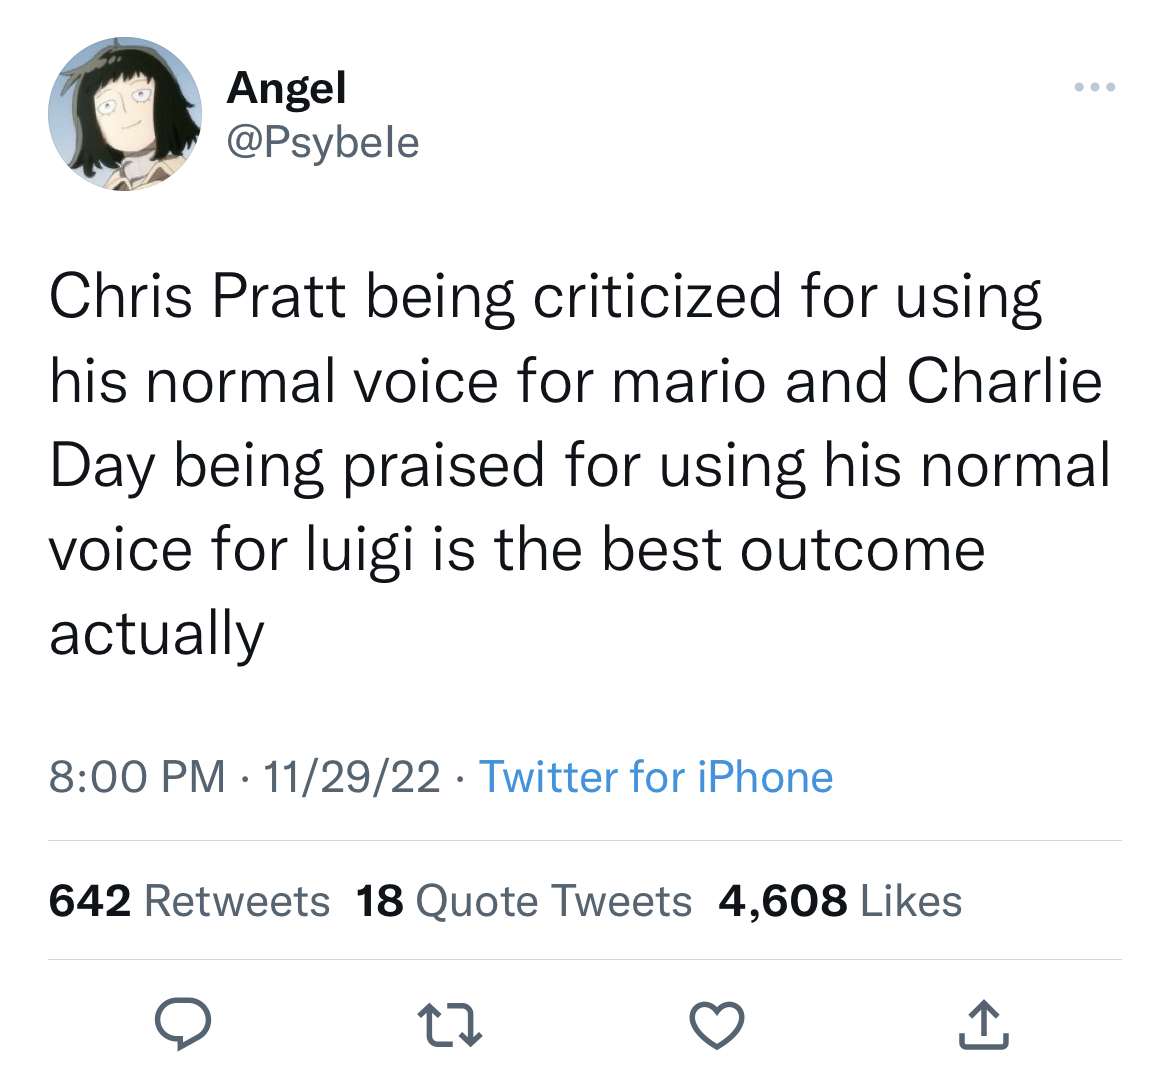 tweets roasting celebs - birth control pills tweets - Angel Chris Pratt being criticized for using his normal voice for mario and Charlie Day being praised for using his normal voice for luigi is the best outcome actually 112922 Twitter for iPhone 642 18 